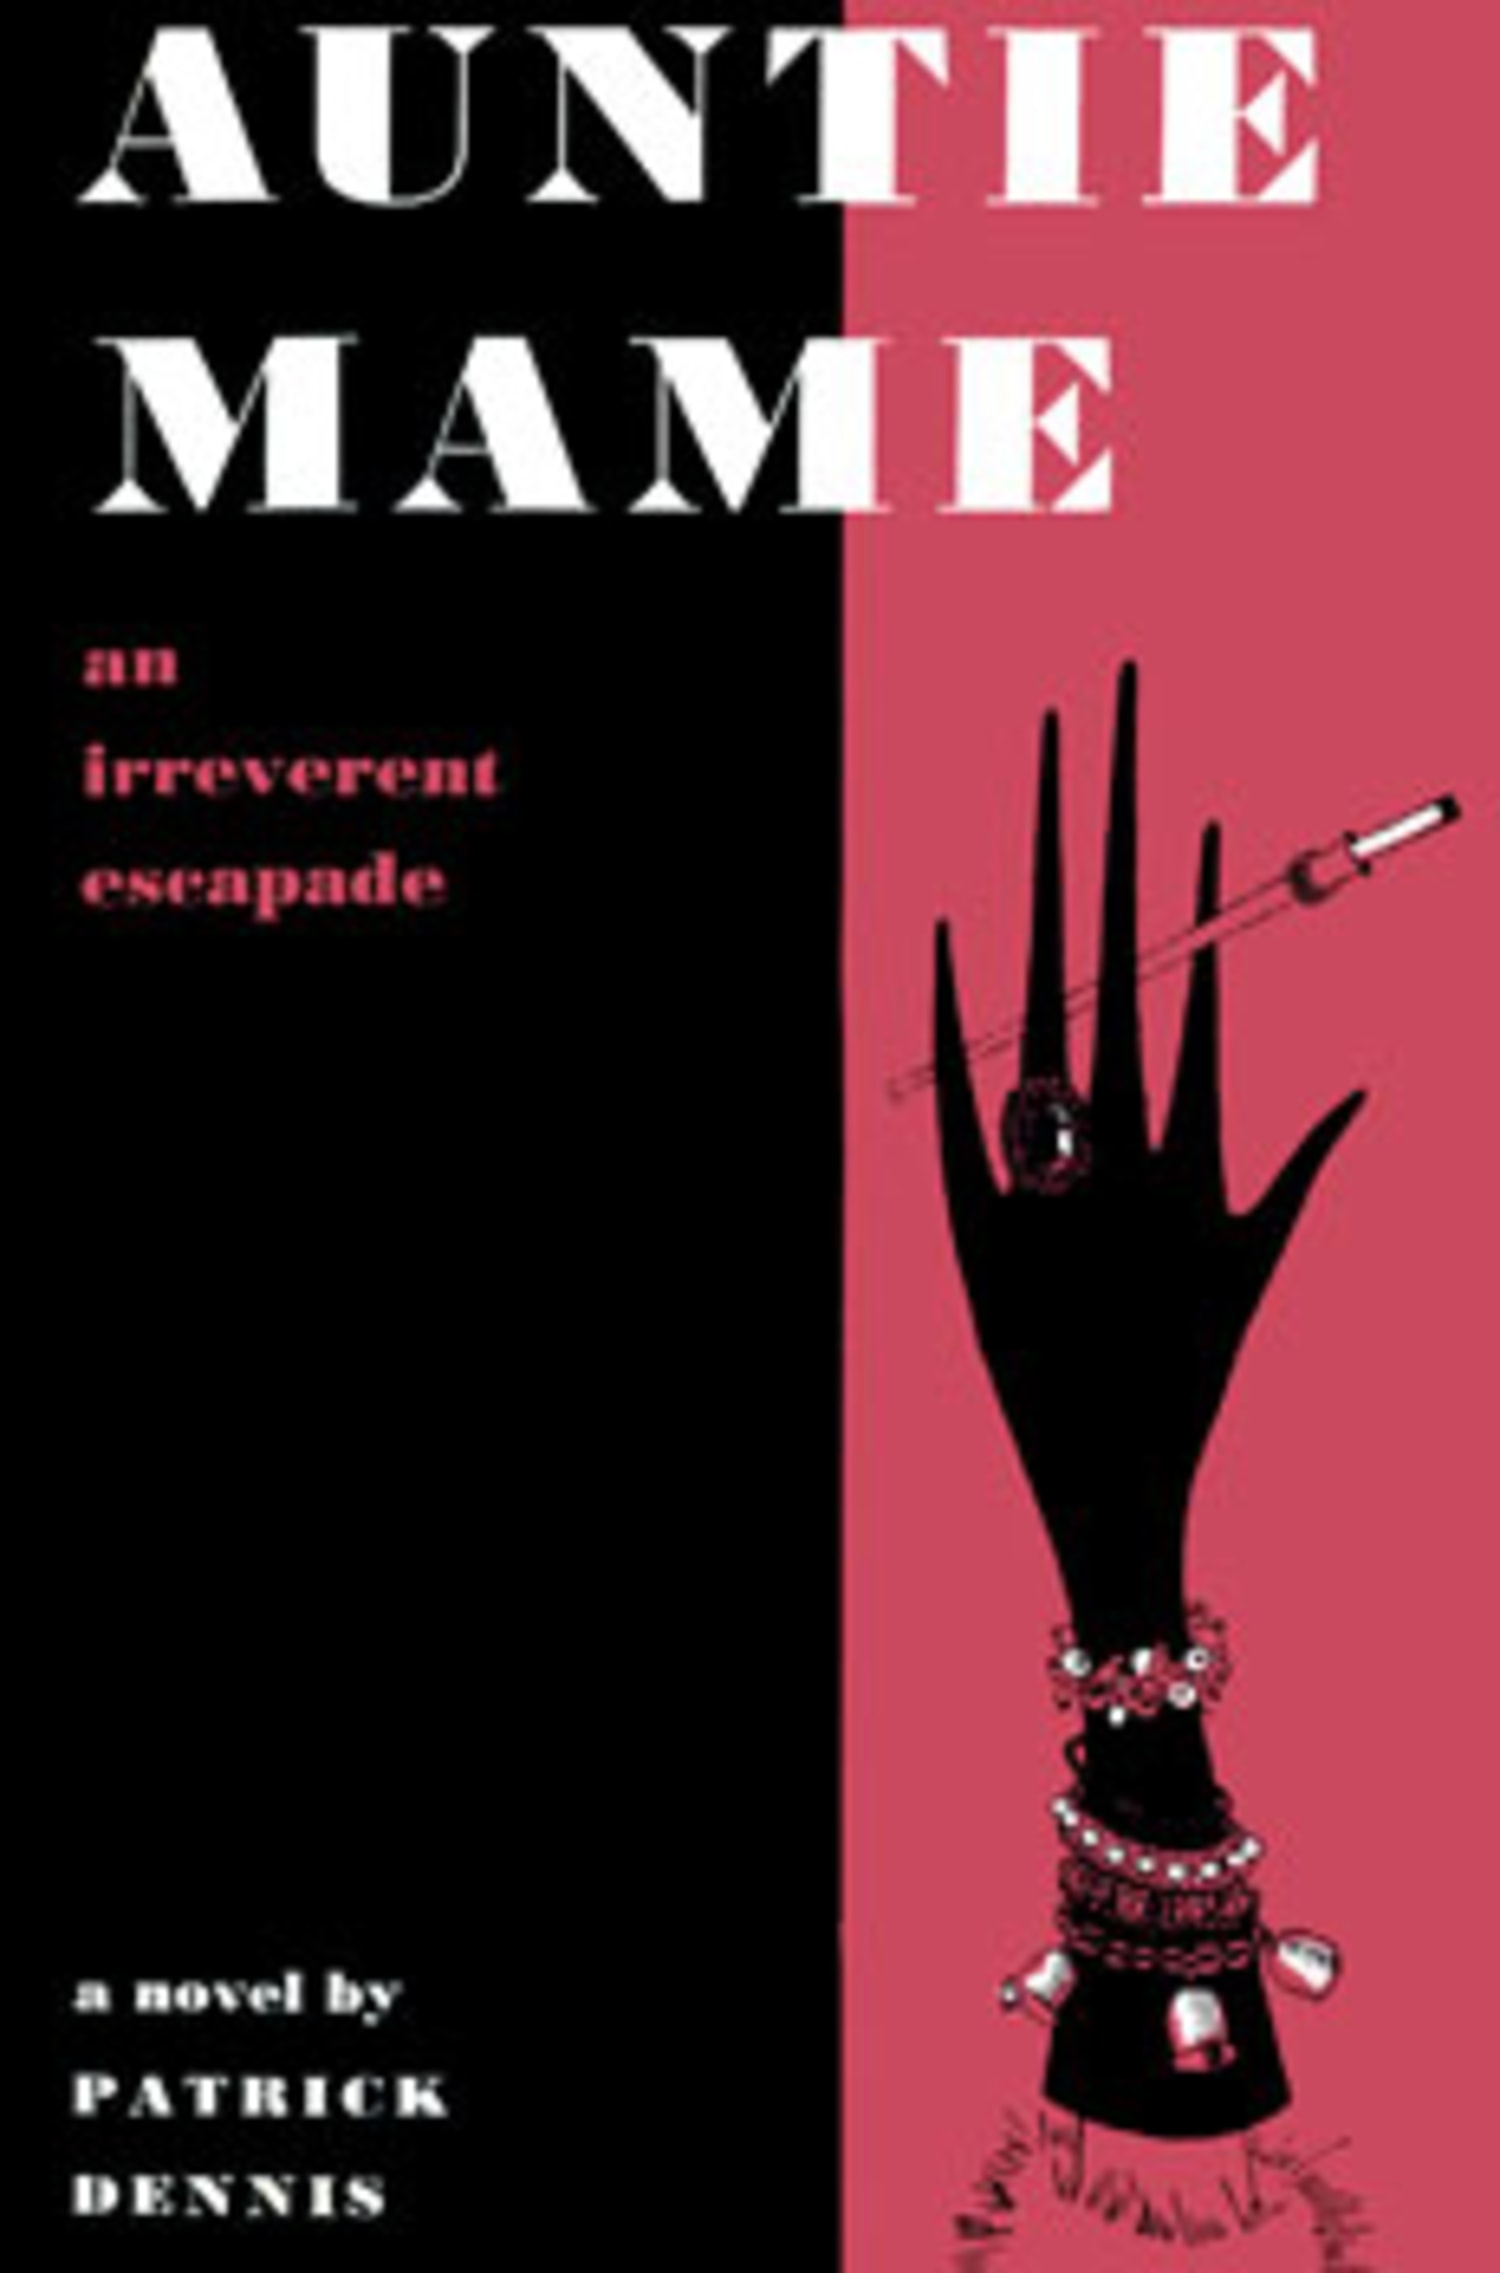 Lost classic Auntie Mame revived after 50-year gap, Books